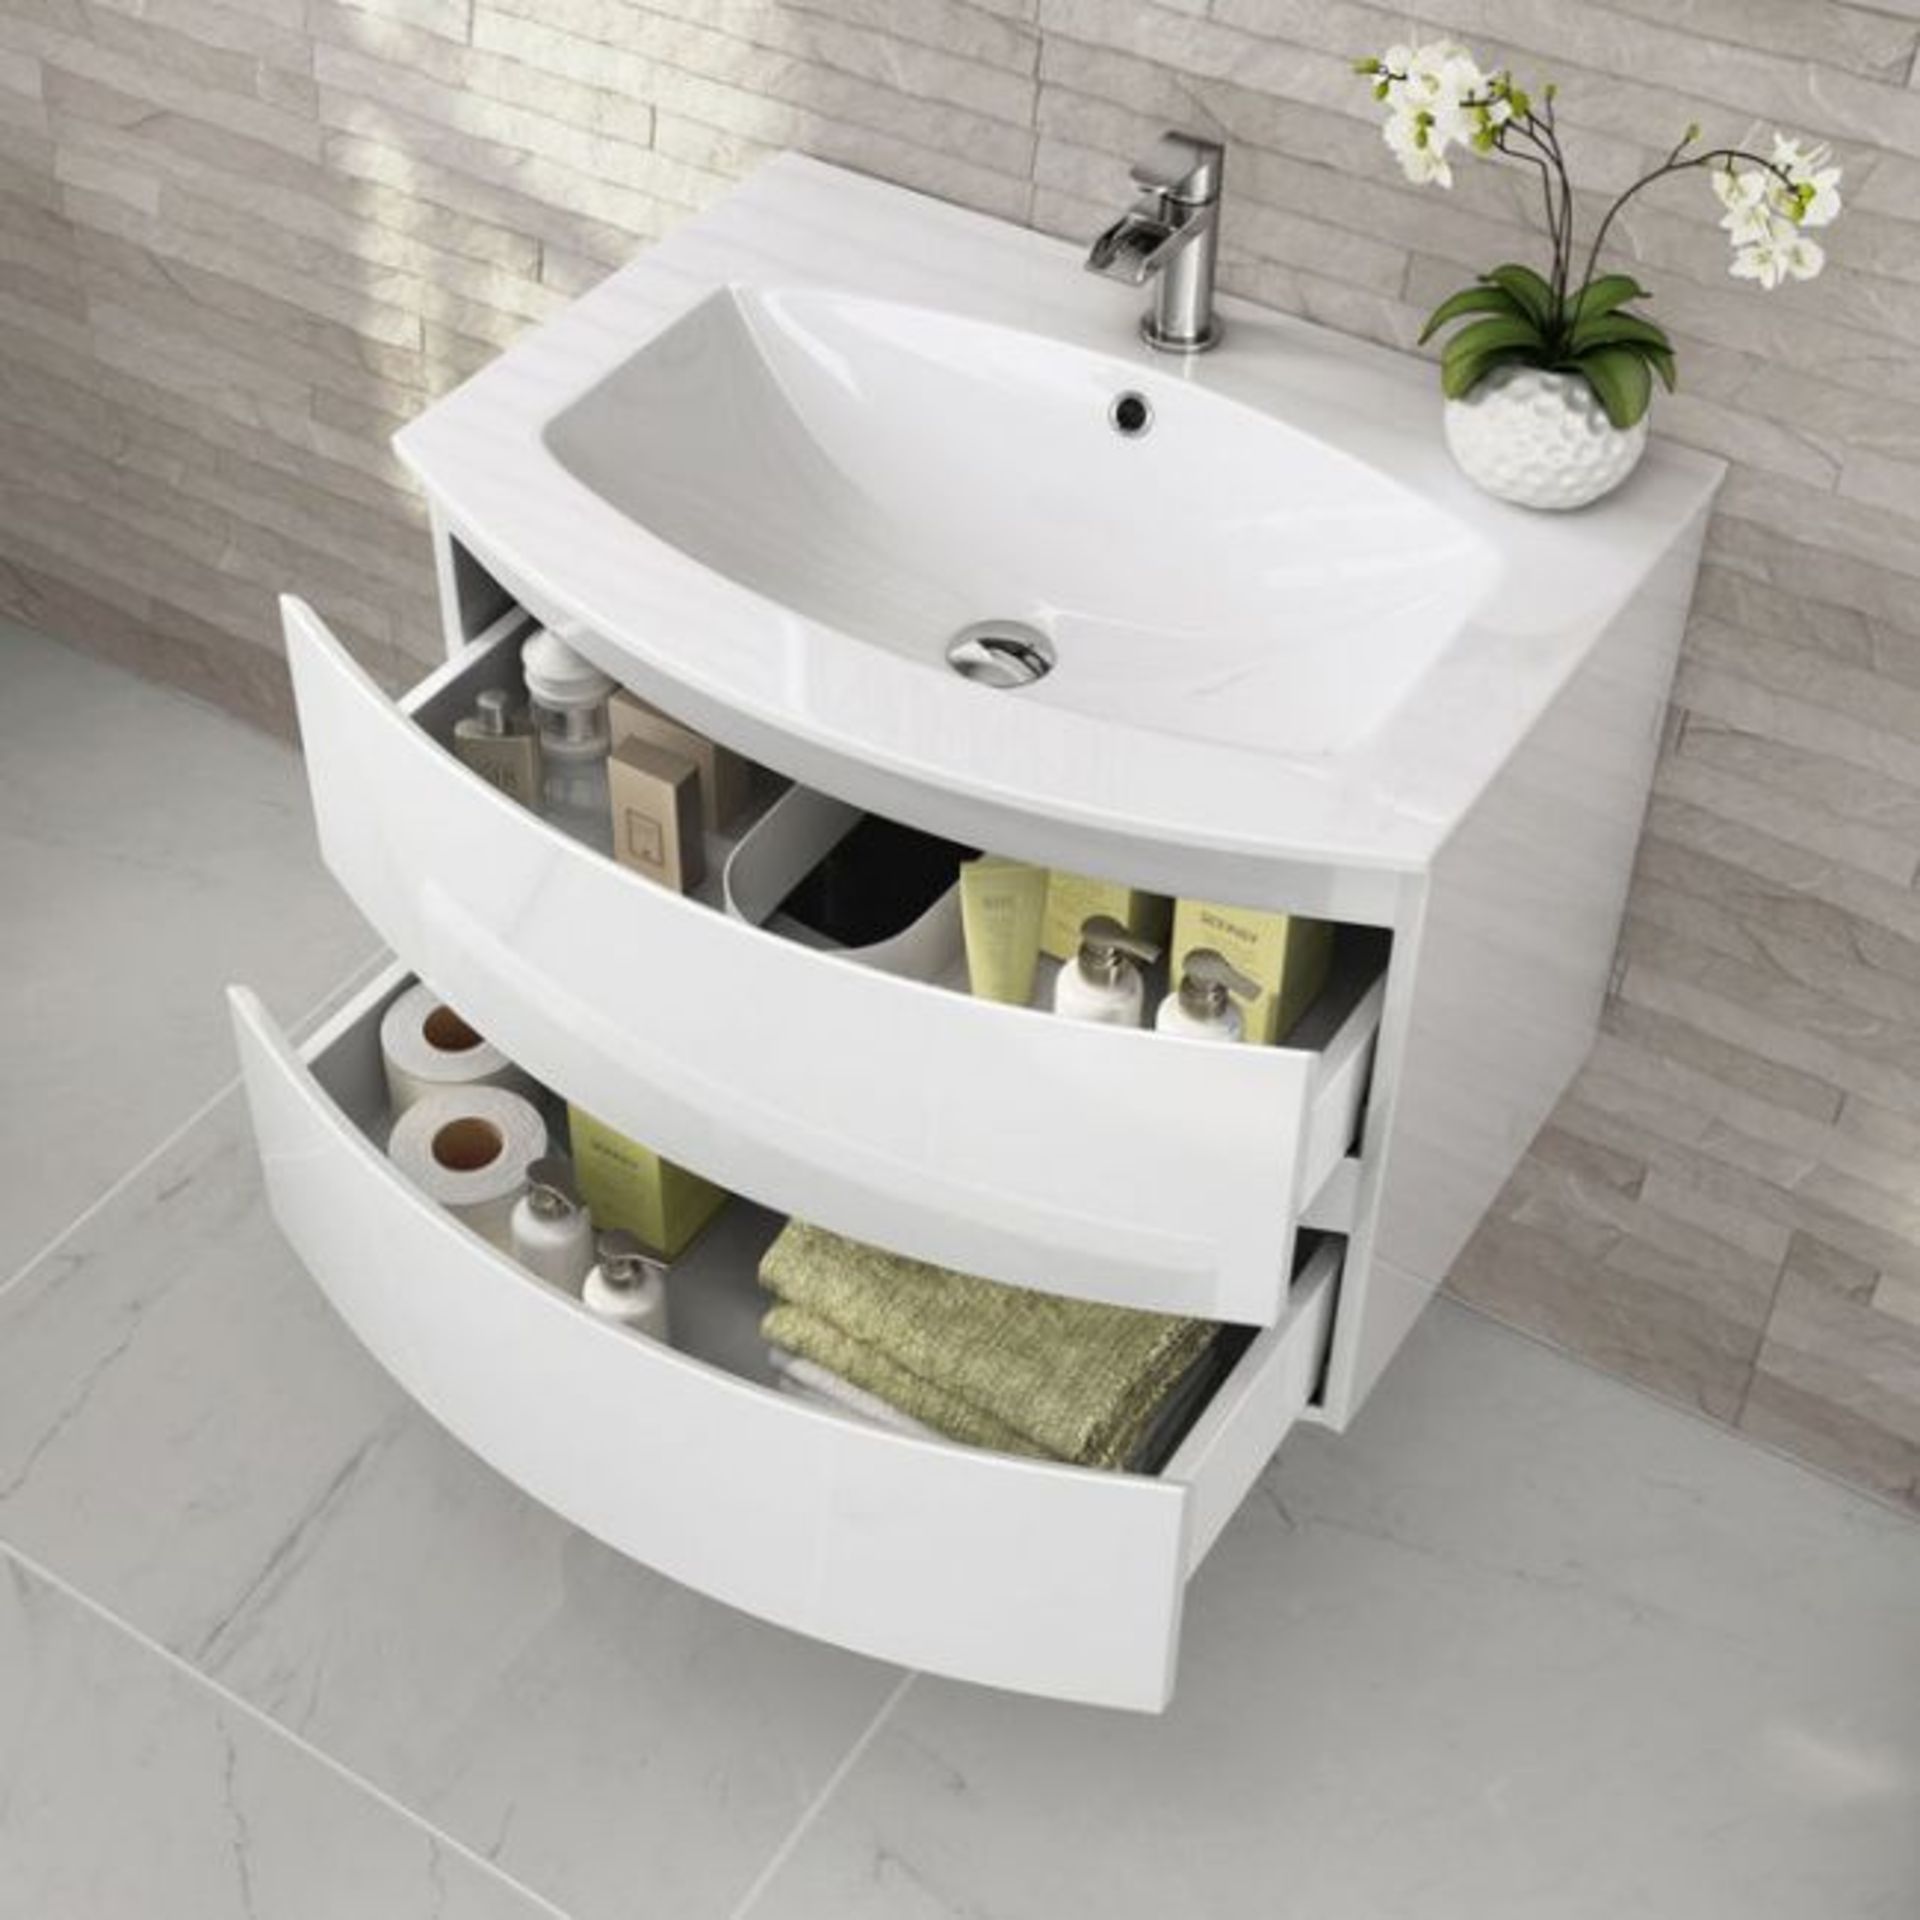 New 700mm Amelie High Gloss White Curved Vanity Unit - Wall Hung. Comes Complete With Basin. ... - Image 2 of 3